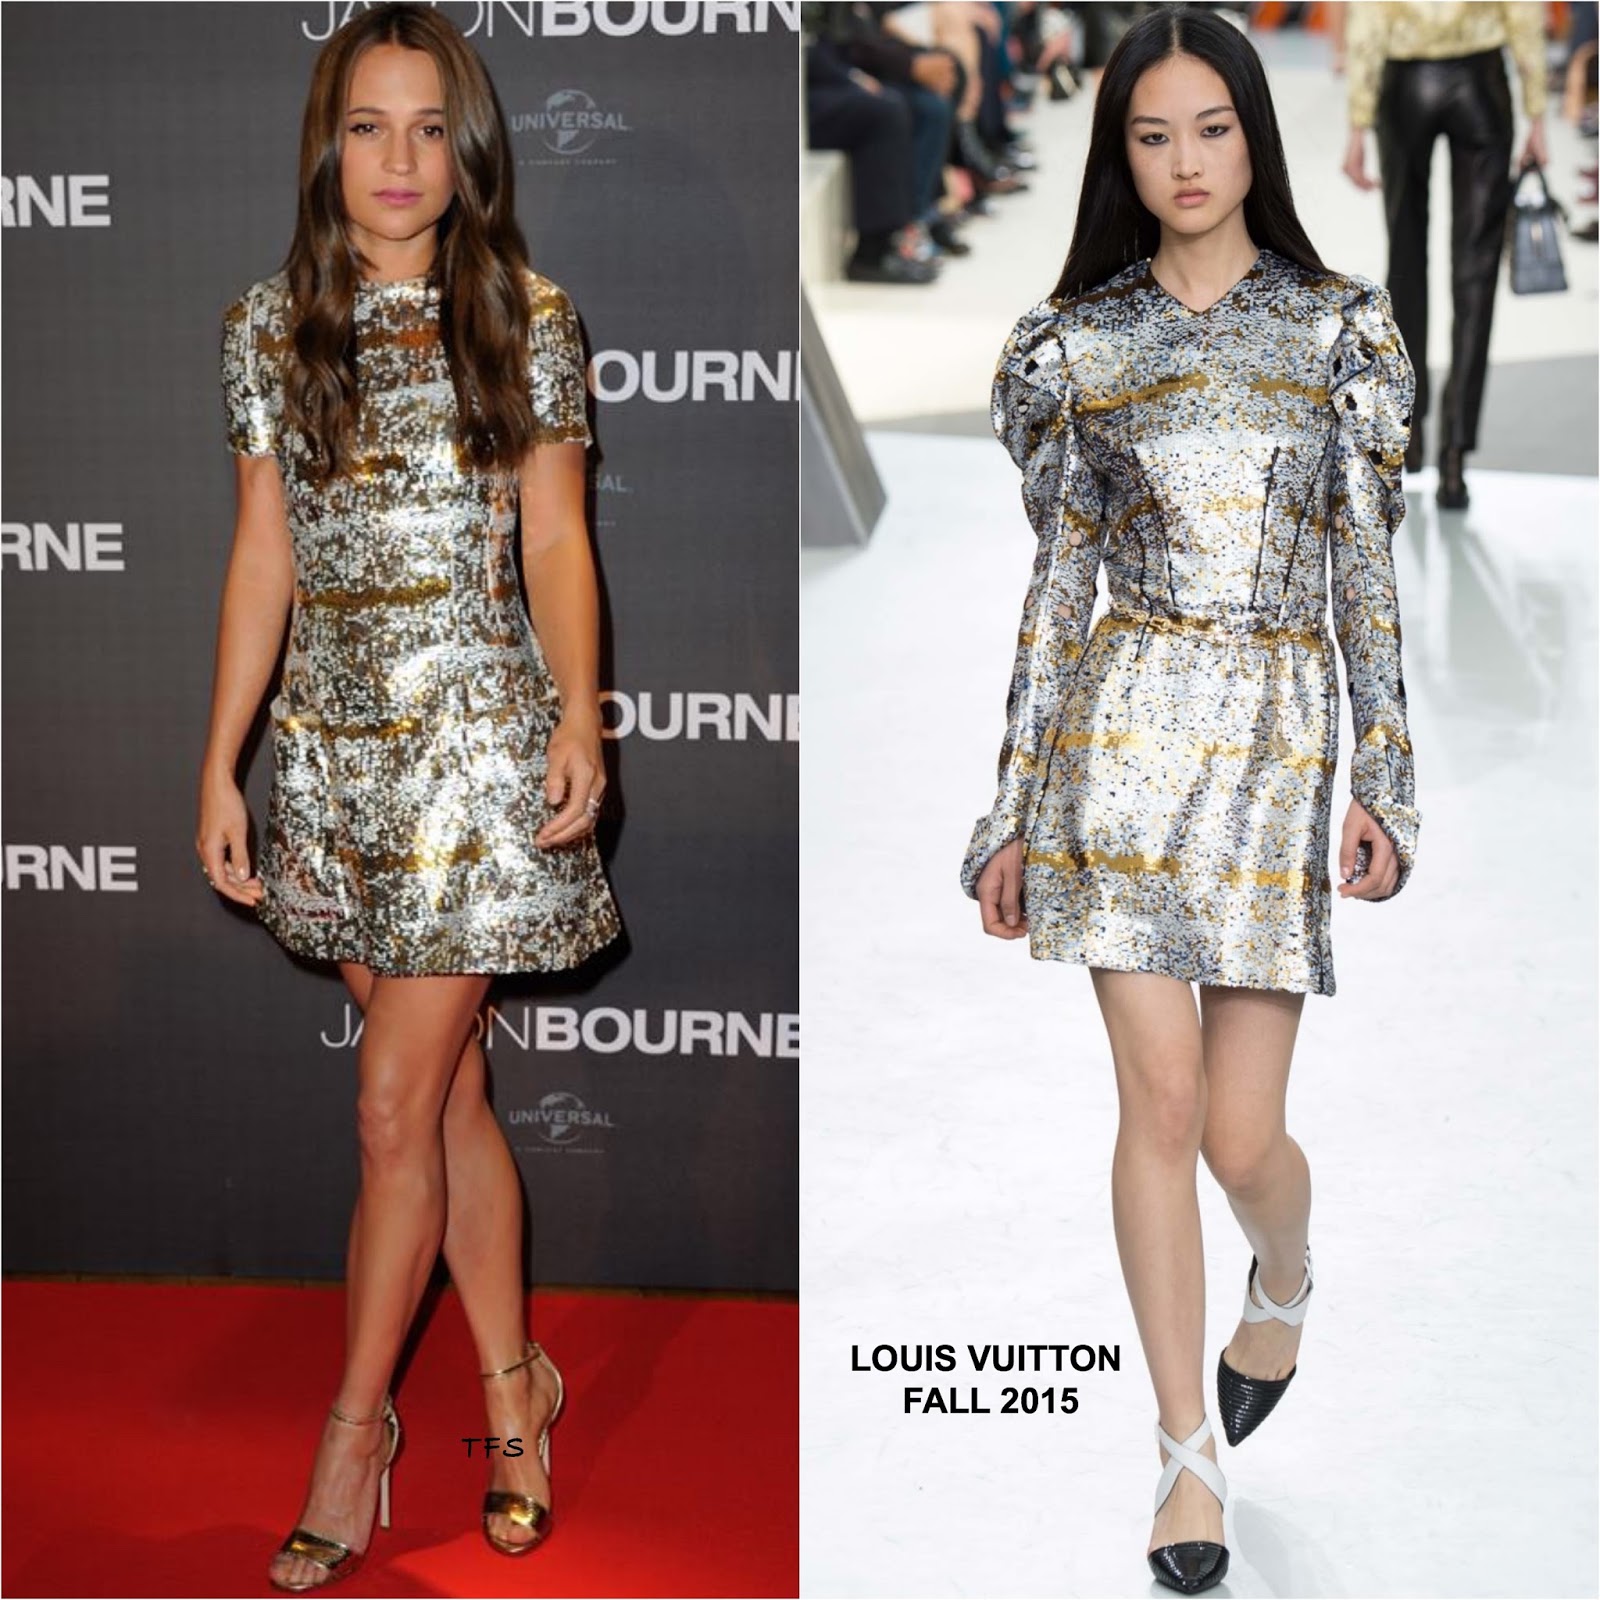 Alicia Vikander in Louis Vuitton for a Night Out